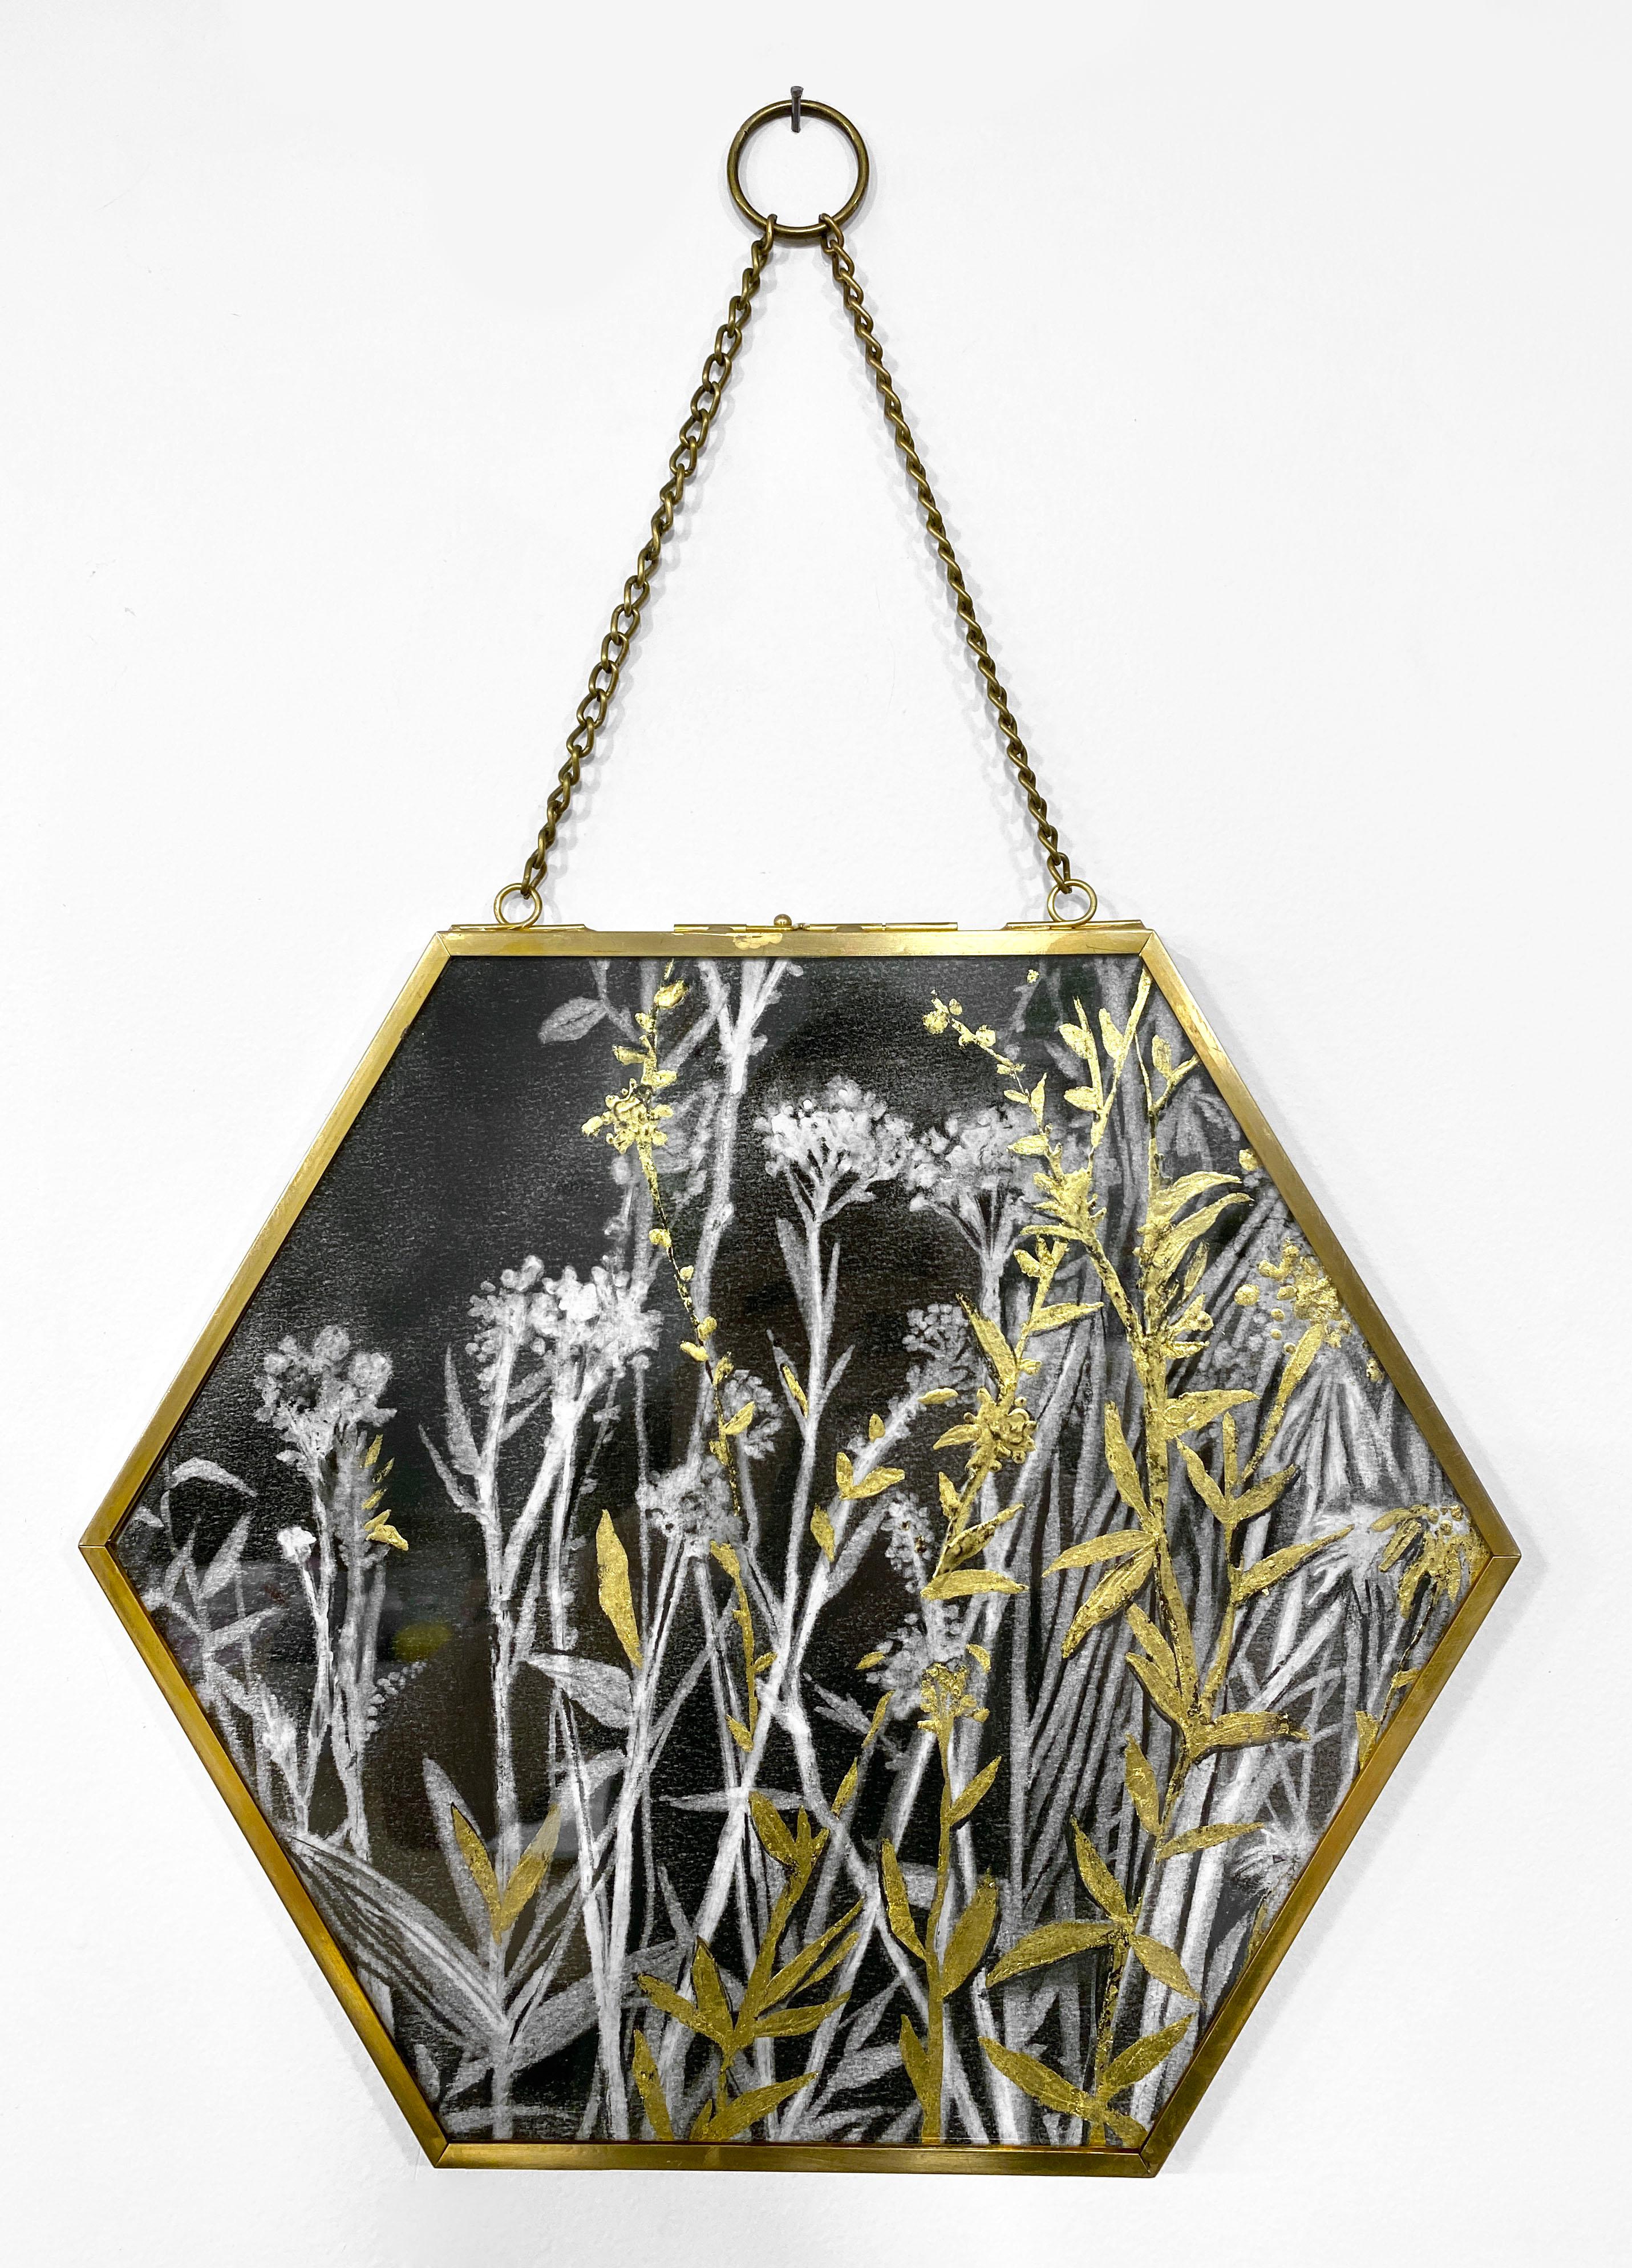 Black & White Botanical Charcoal Drawing with Gold Leaf in Metal Hexagon Frame